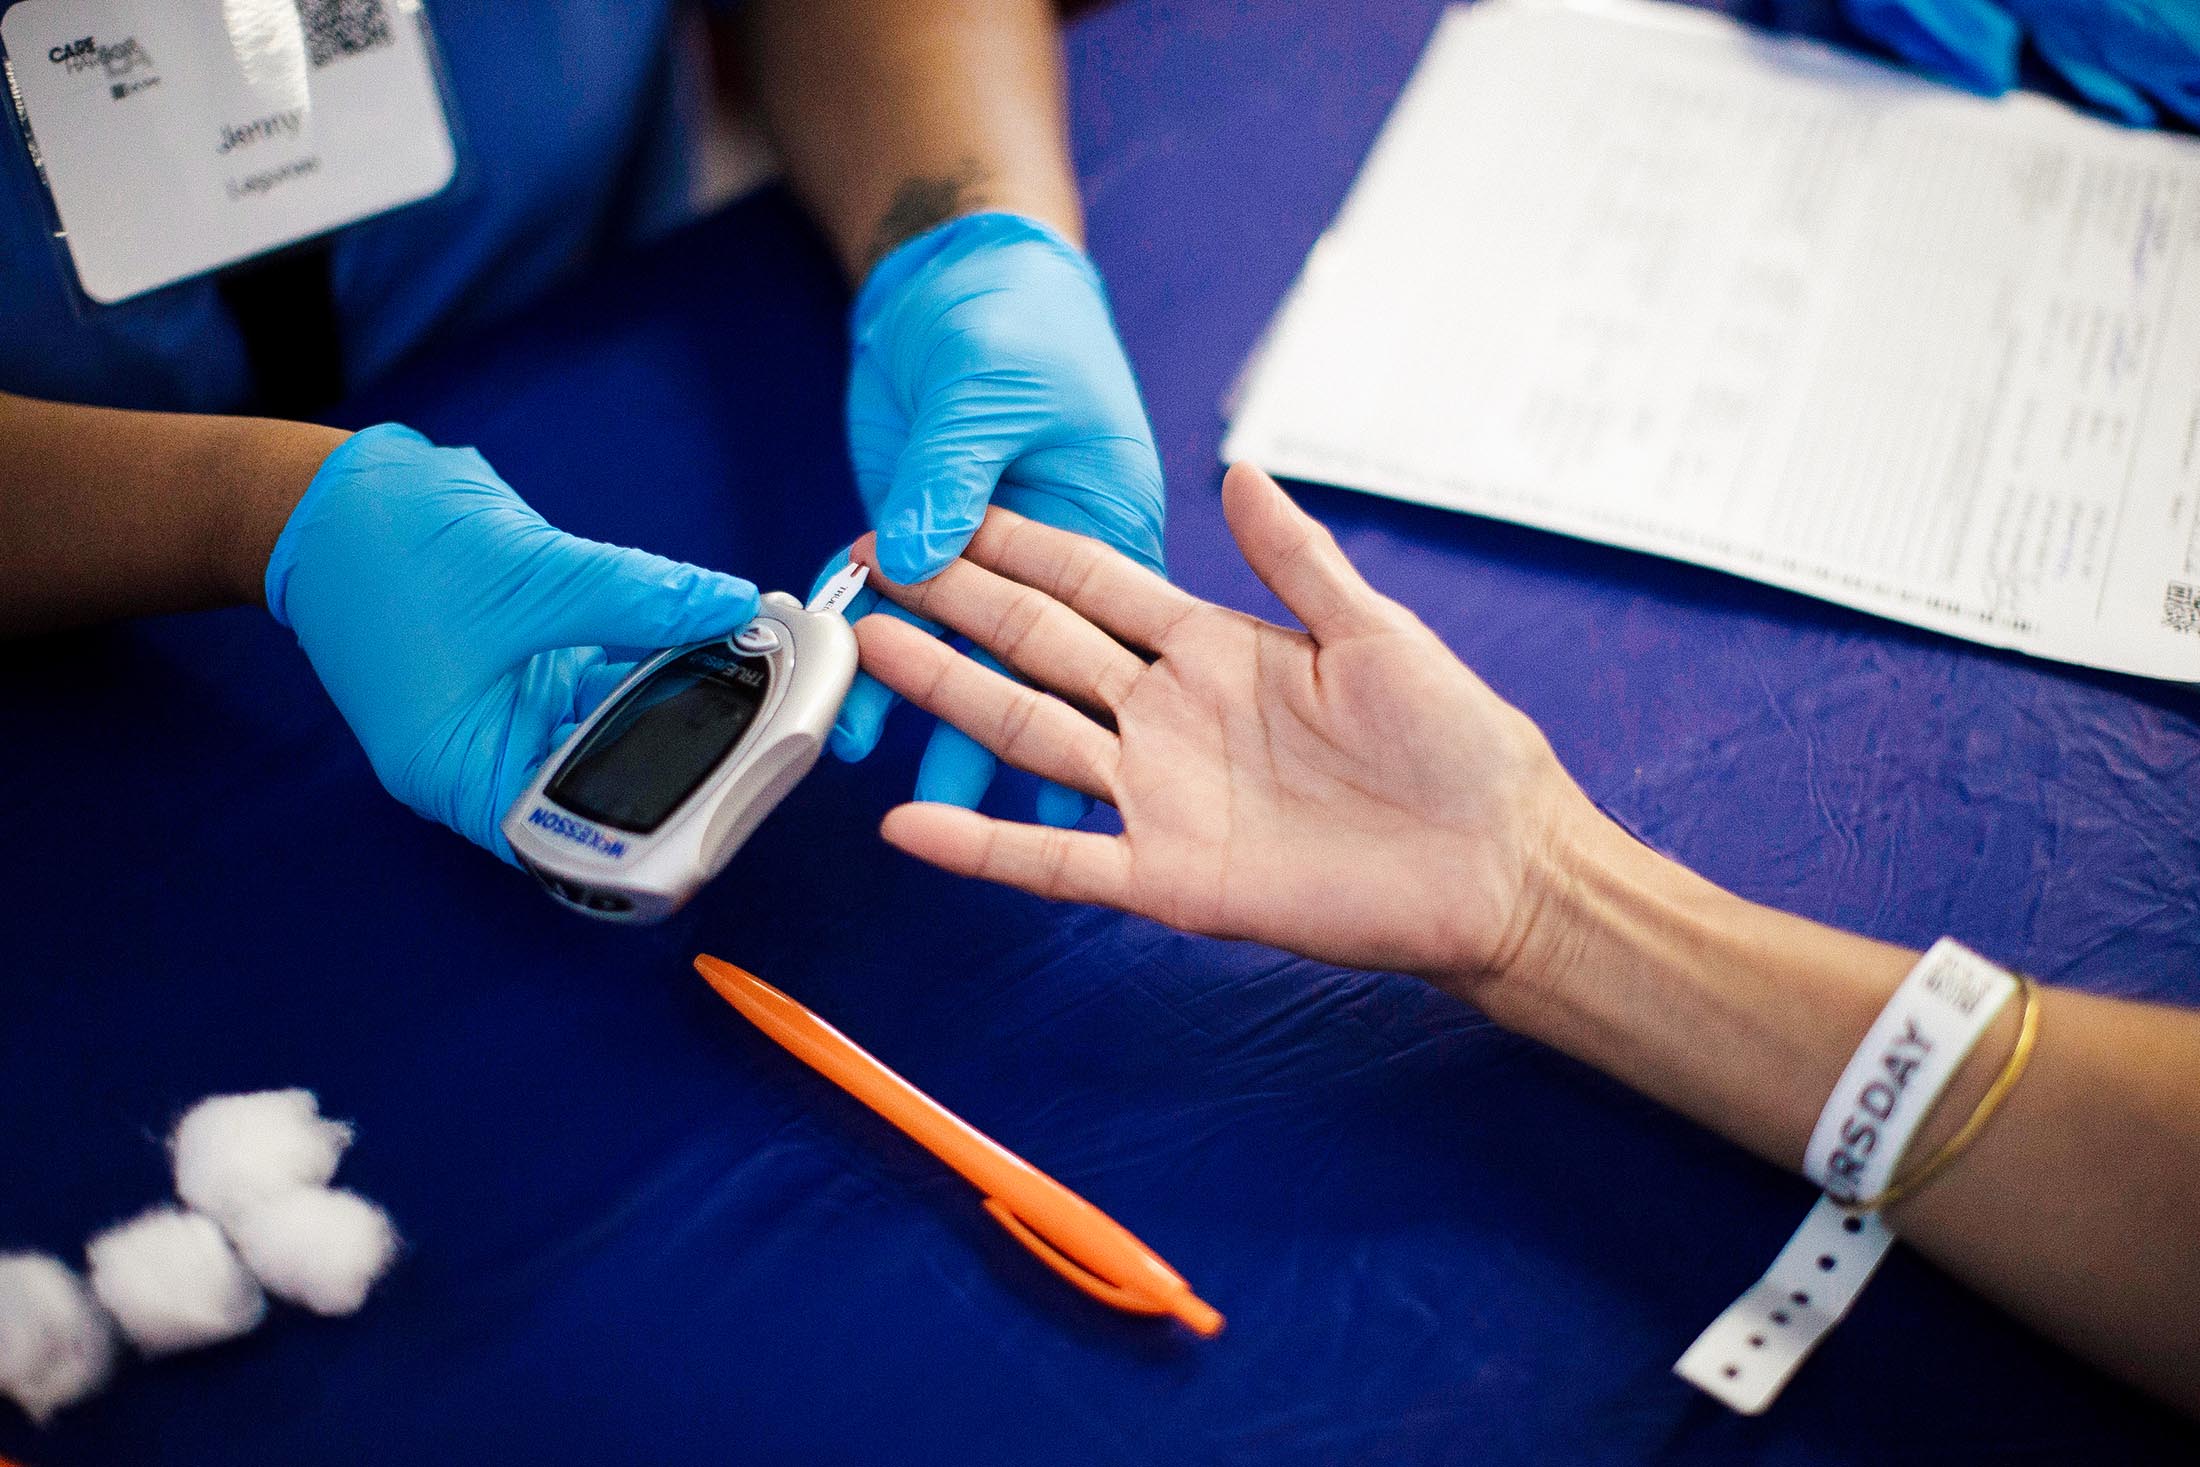 A patient’s finger is poked for a diabetes test.